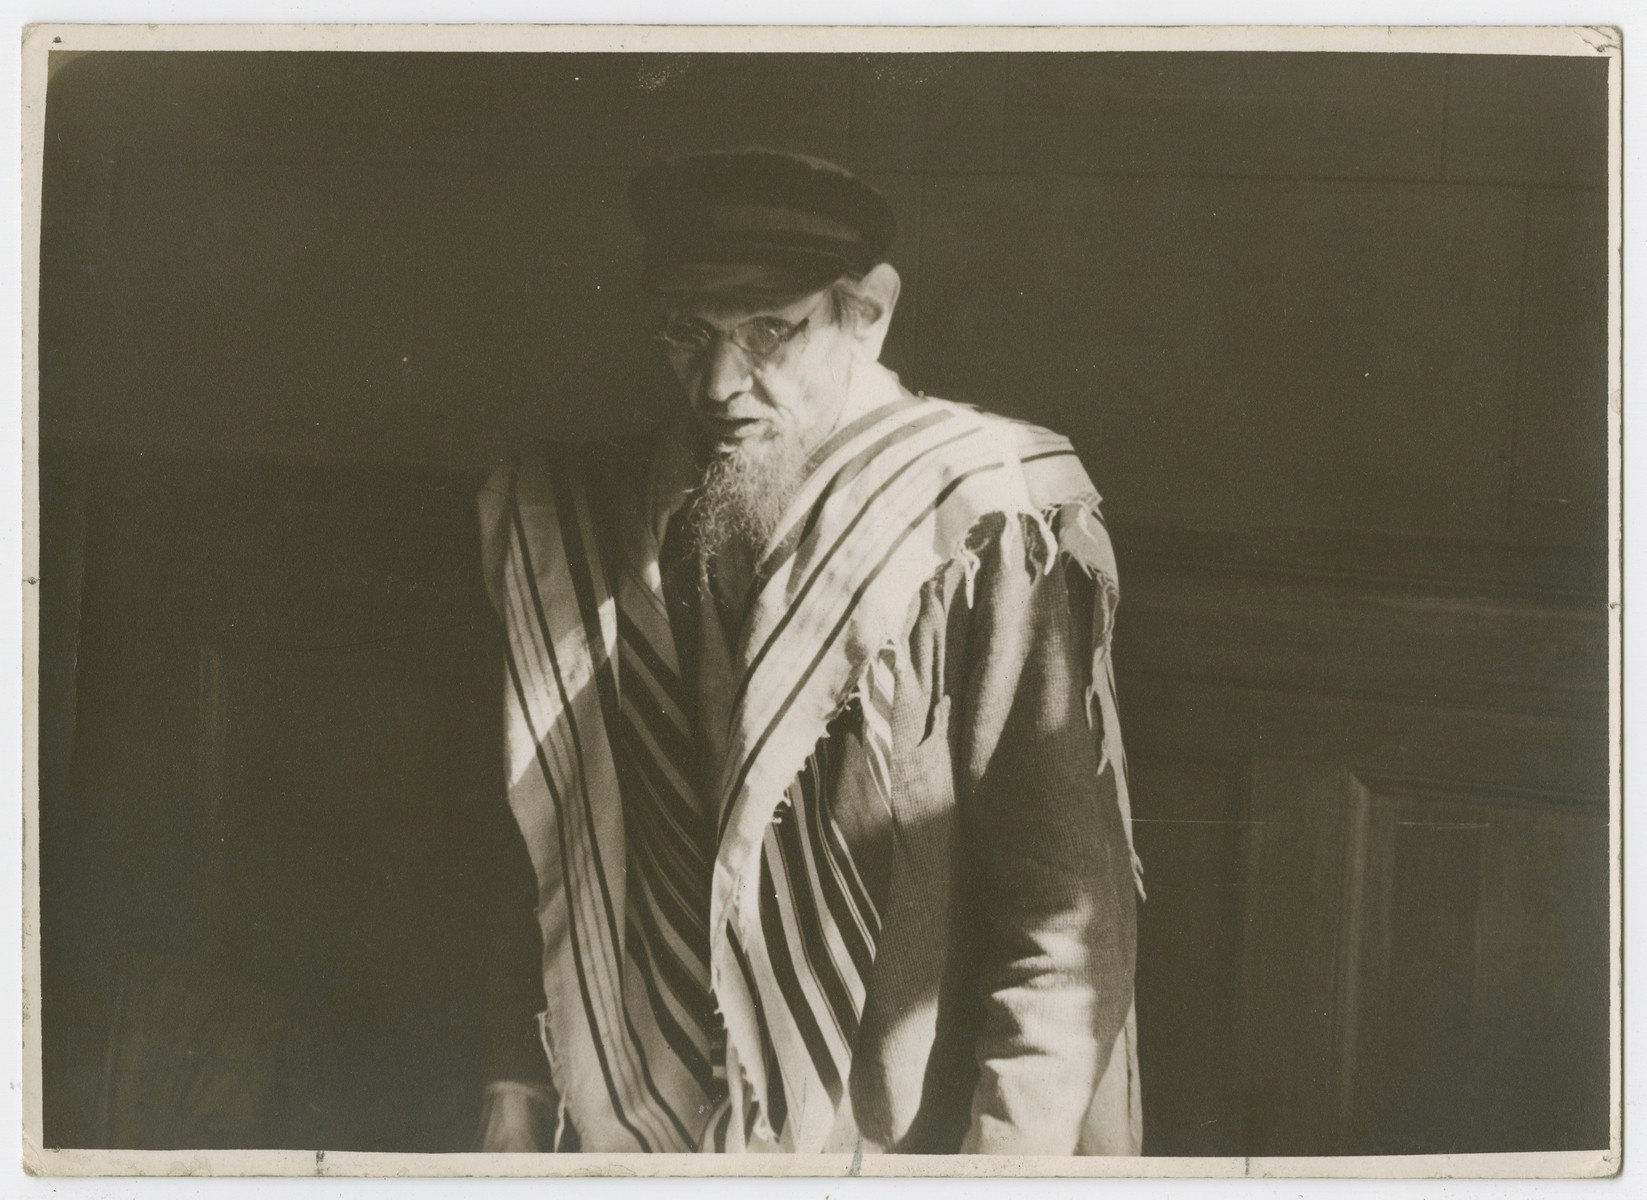 Portrait of a Jewish man wrapped in a tallit at the Great Synagogue in Moscow on Rosh Hashanah.

Photograph is used on page 332 of Robert Gessner's "Some of My Best Friends are Jews."